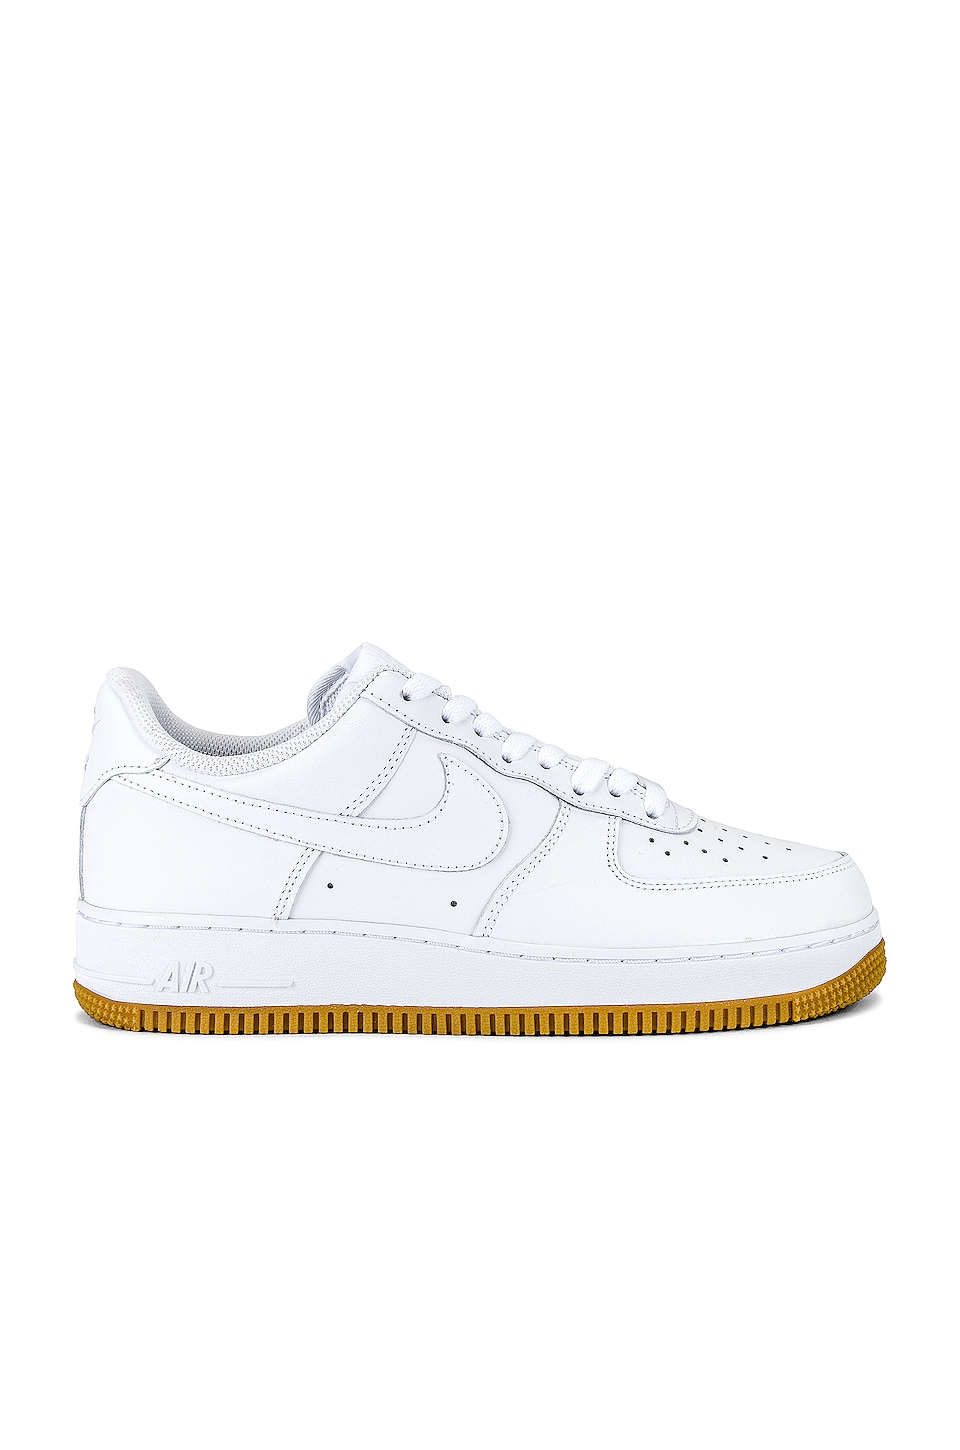 Nike Air Force 1 '07 in White | REVOLVE